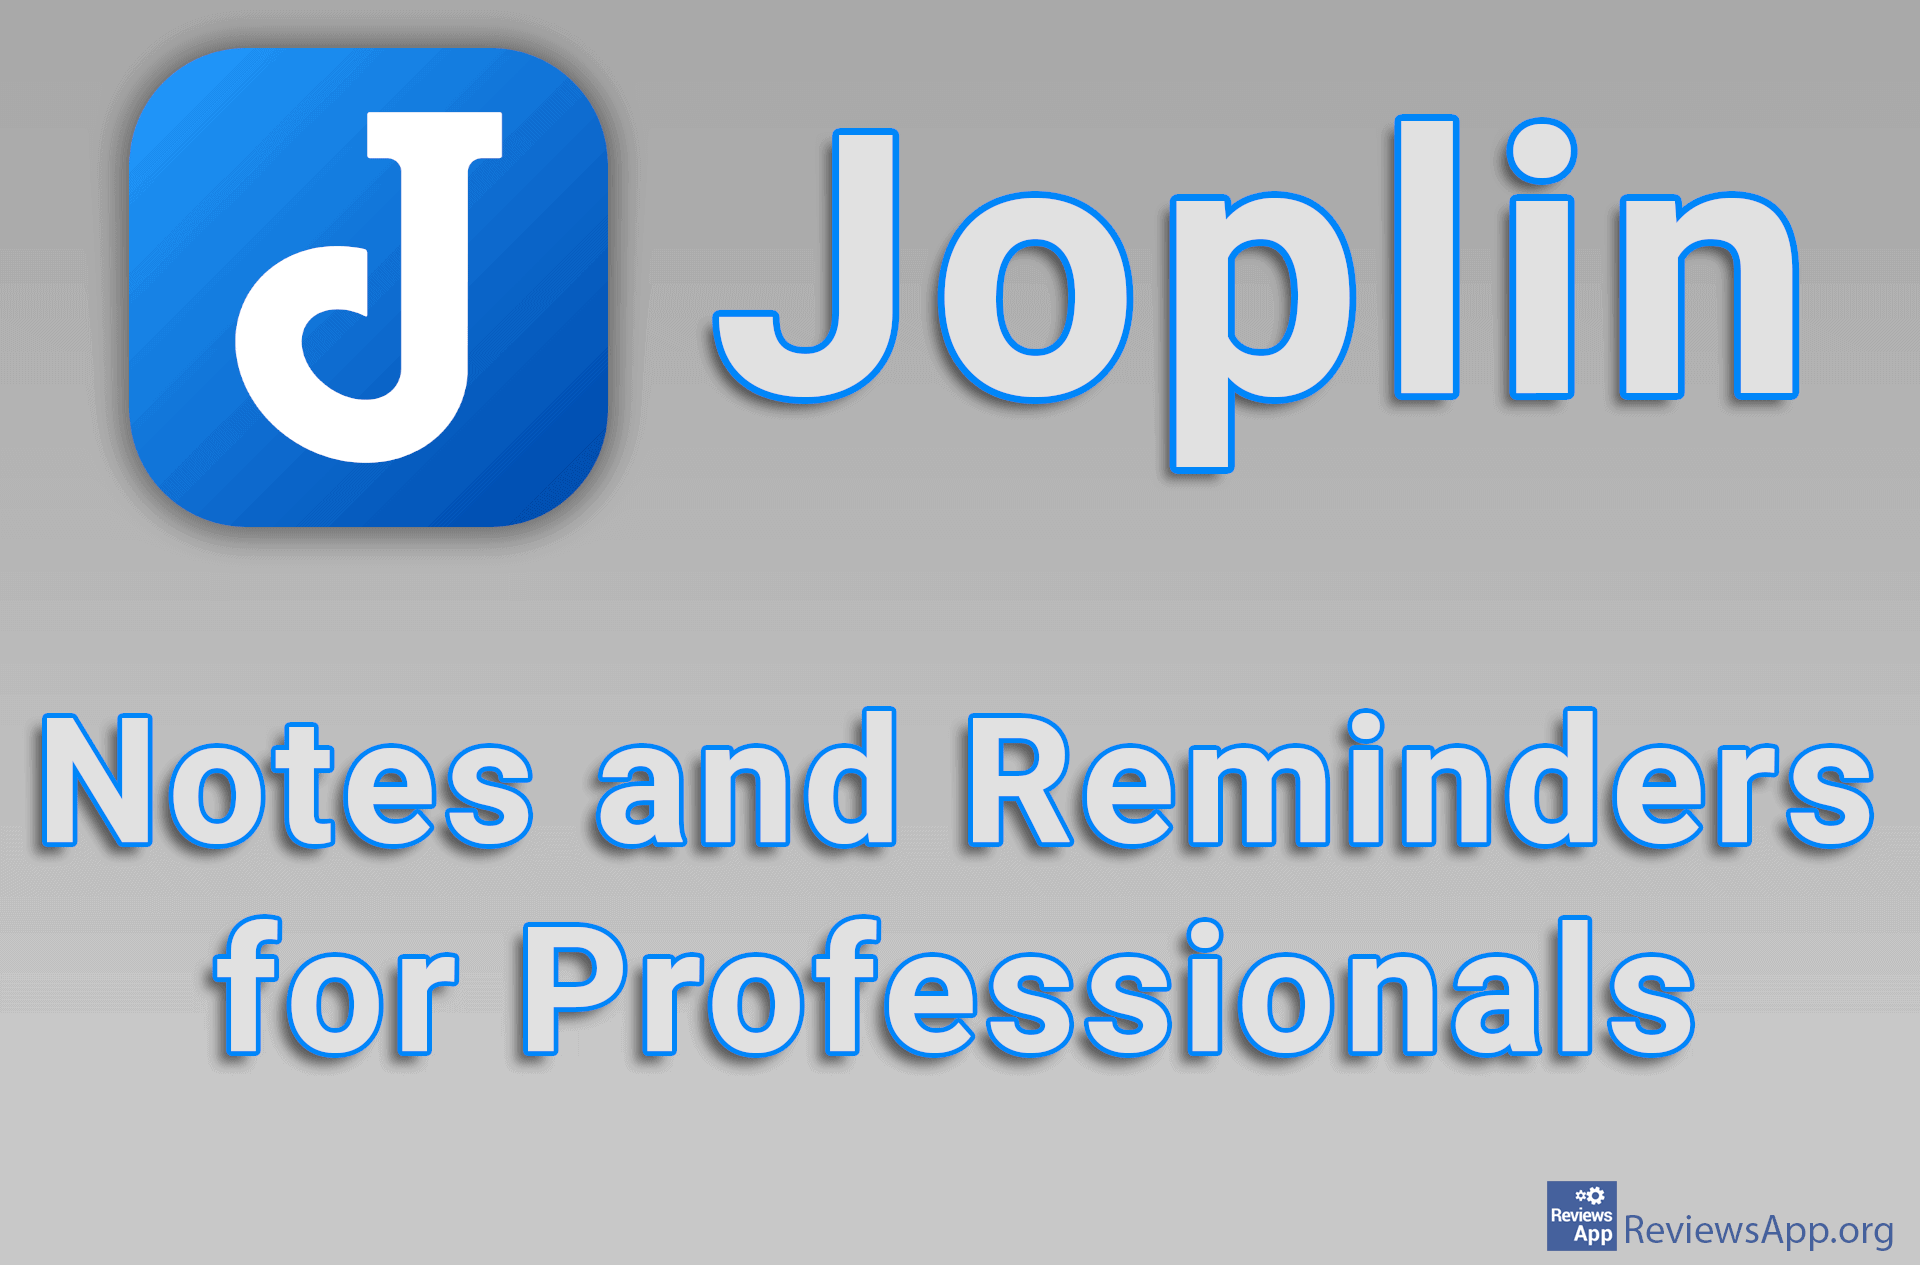 Joplin – Notes and Reminders for Professionals